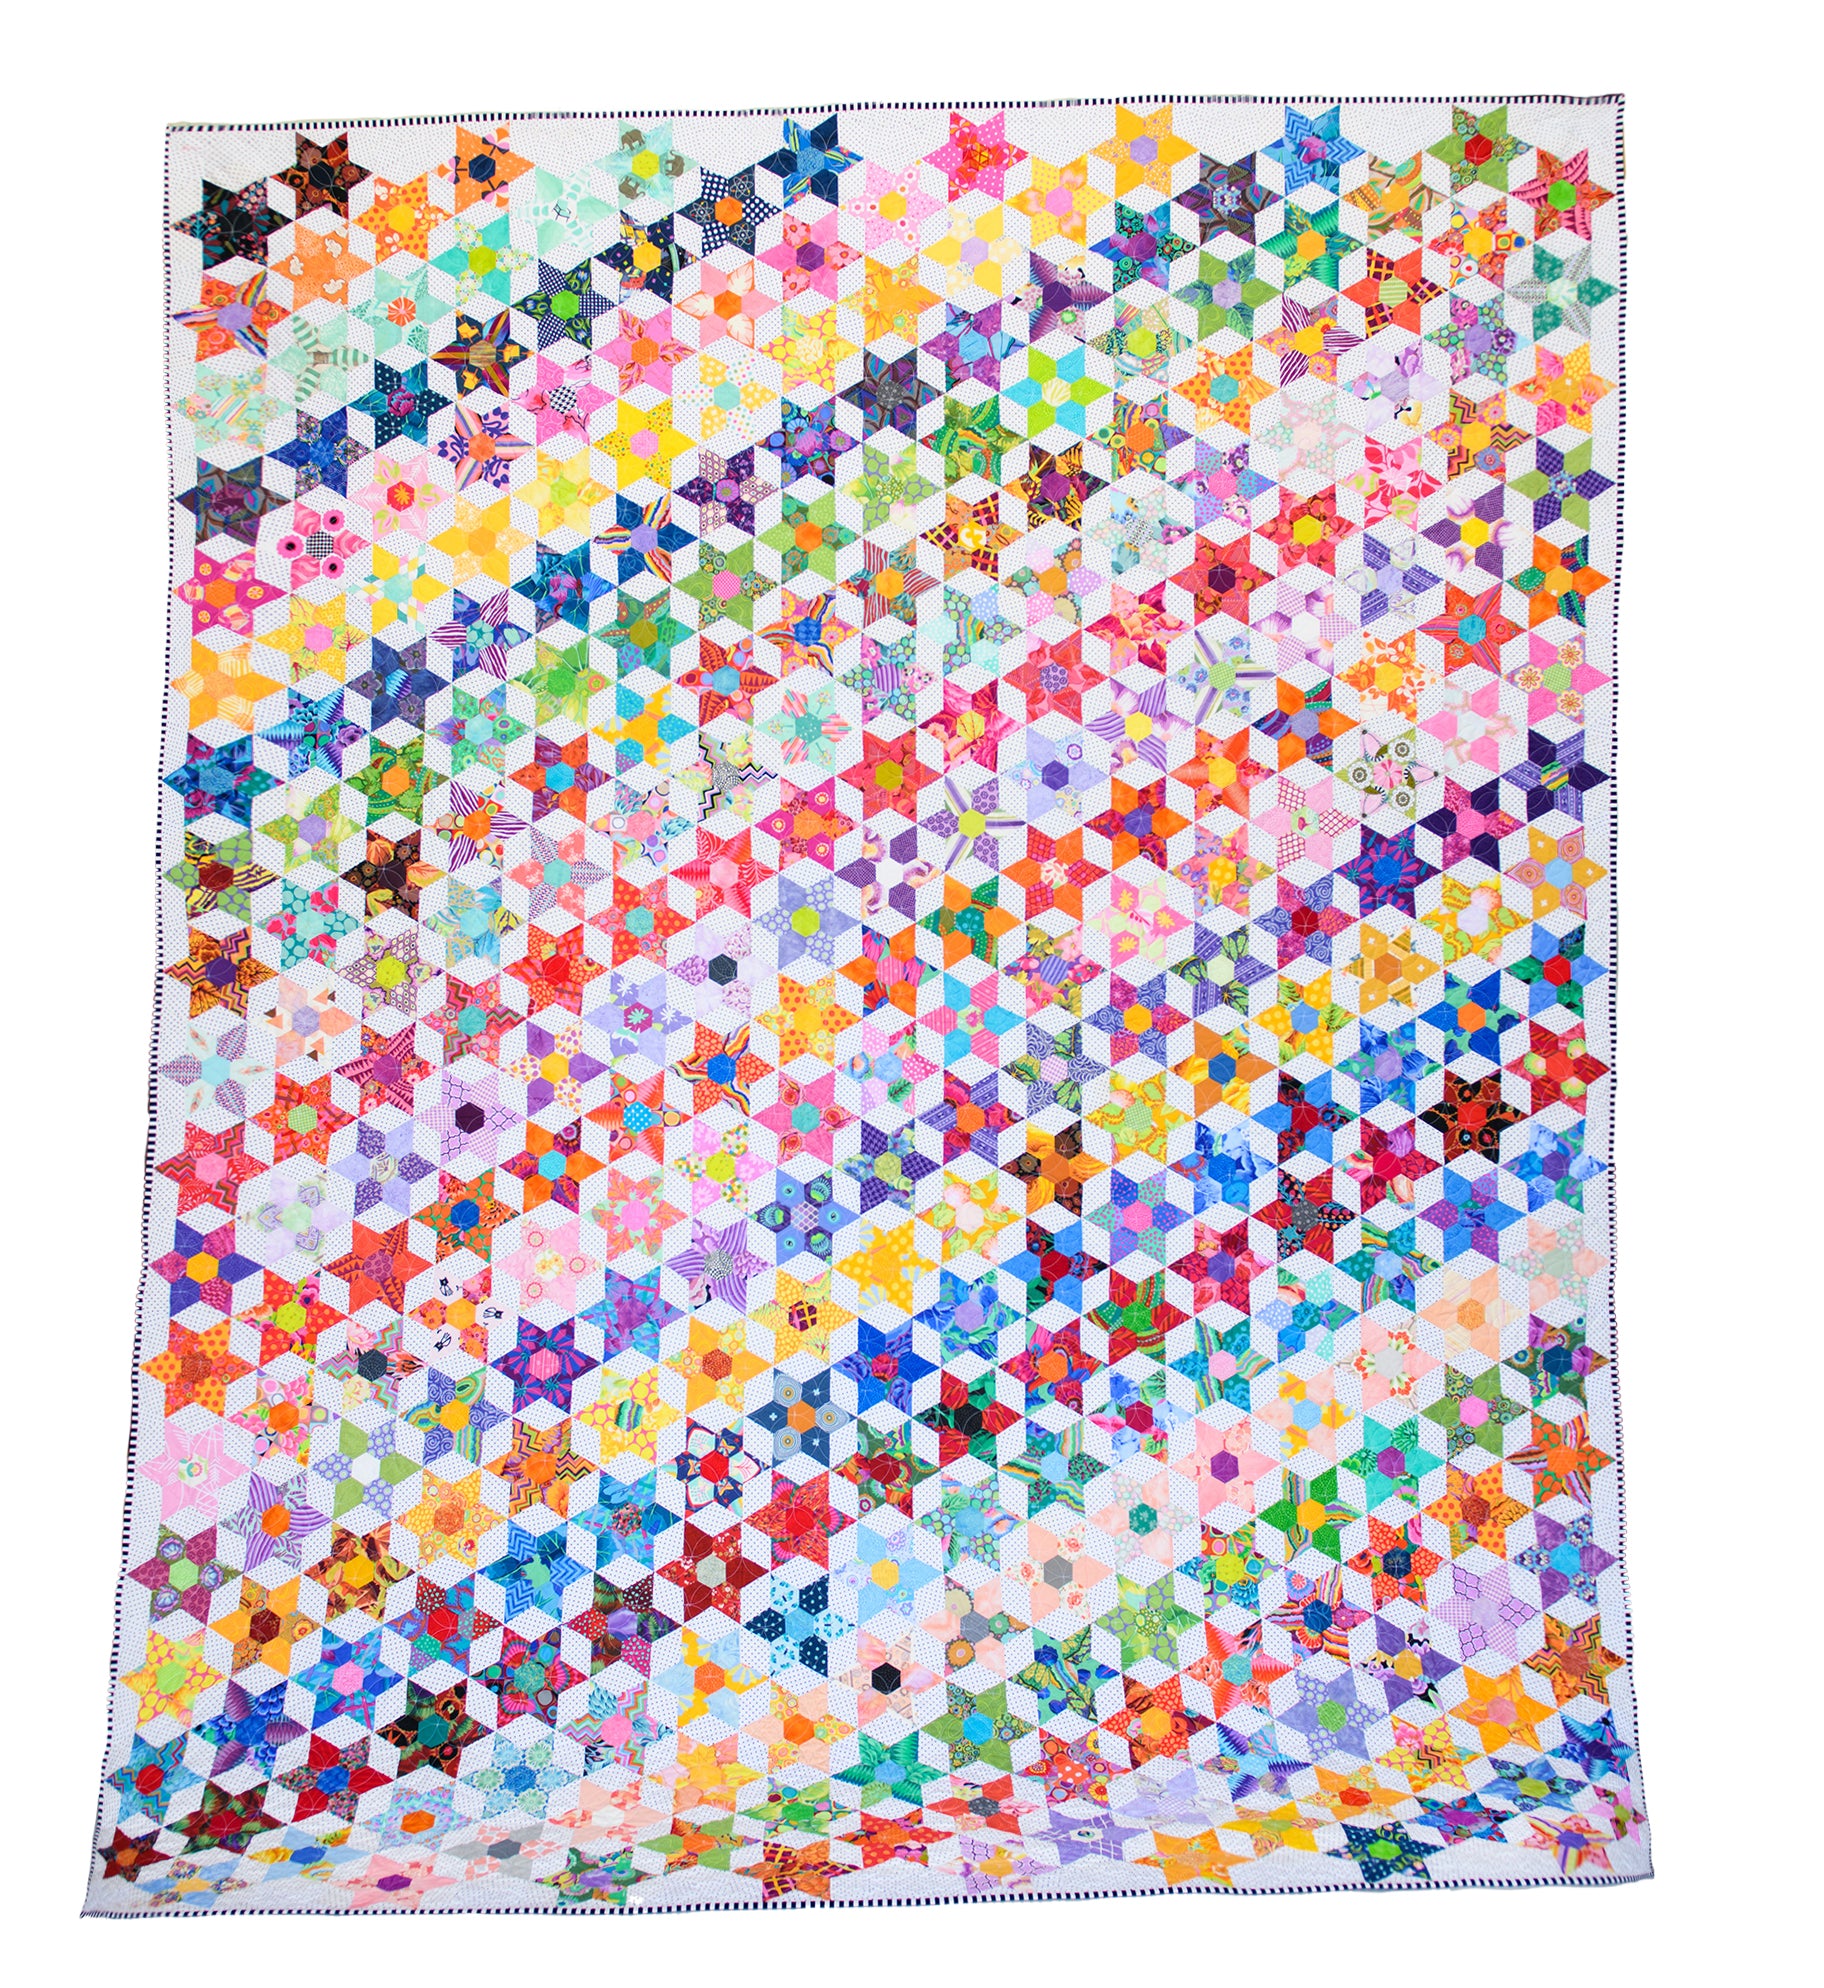 Daisy Chain Quilt made with English Paper Piecing Made Easy templates